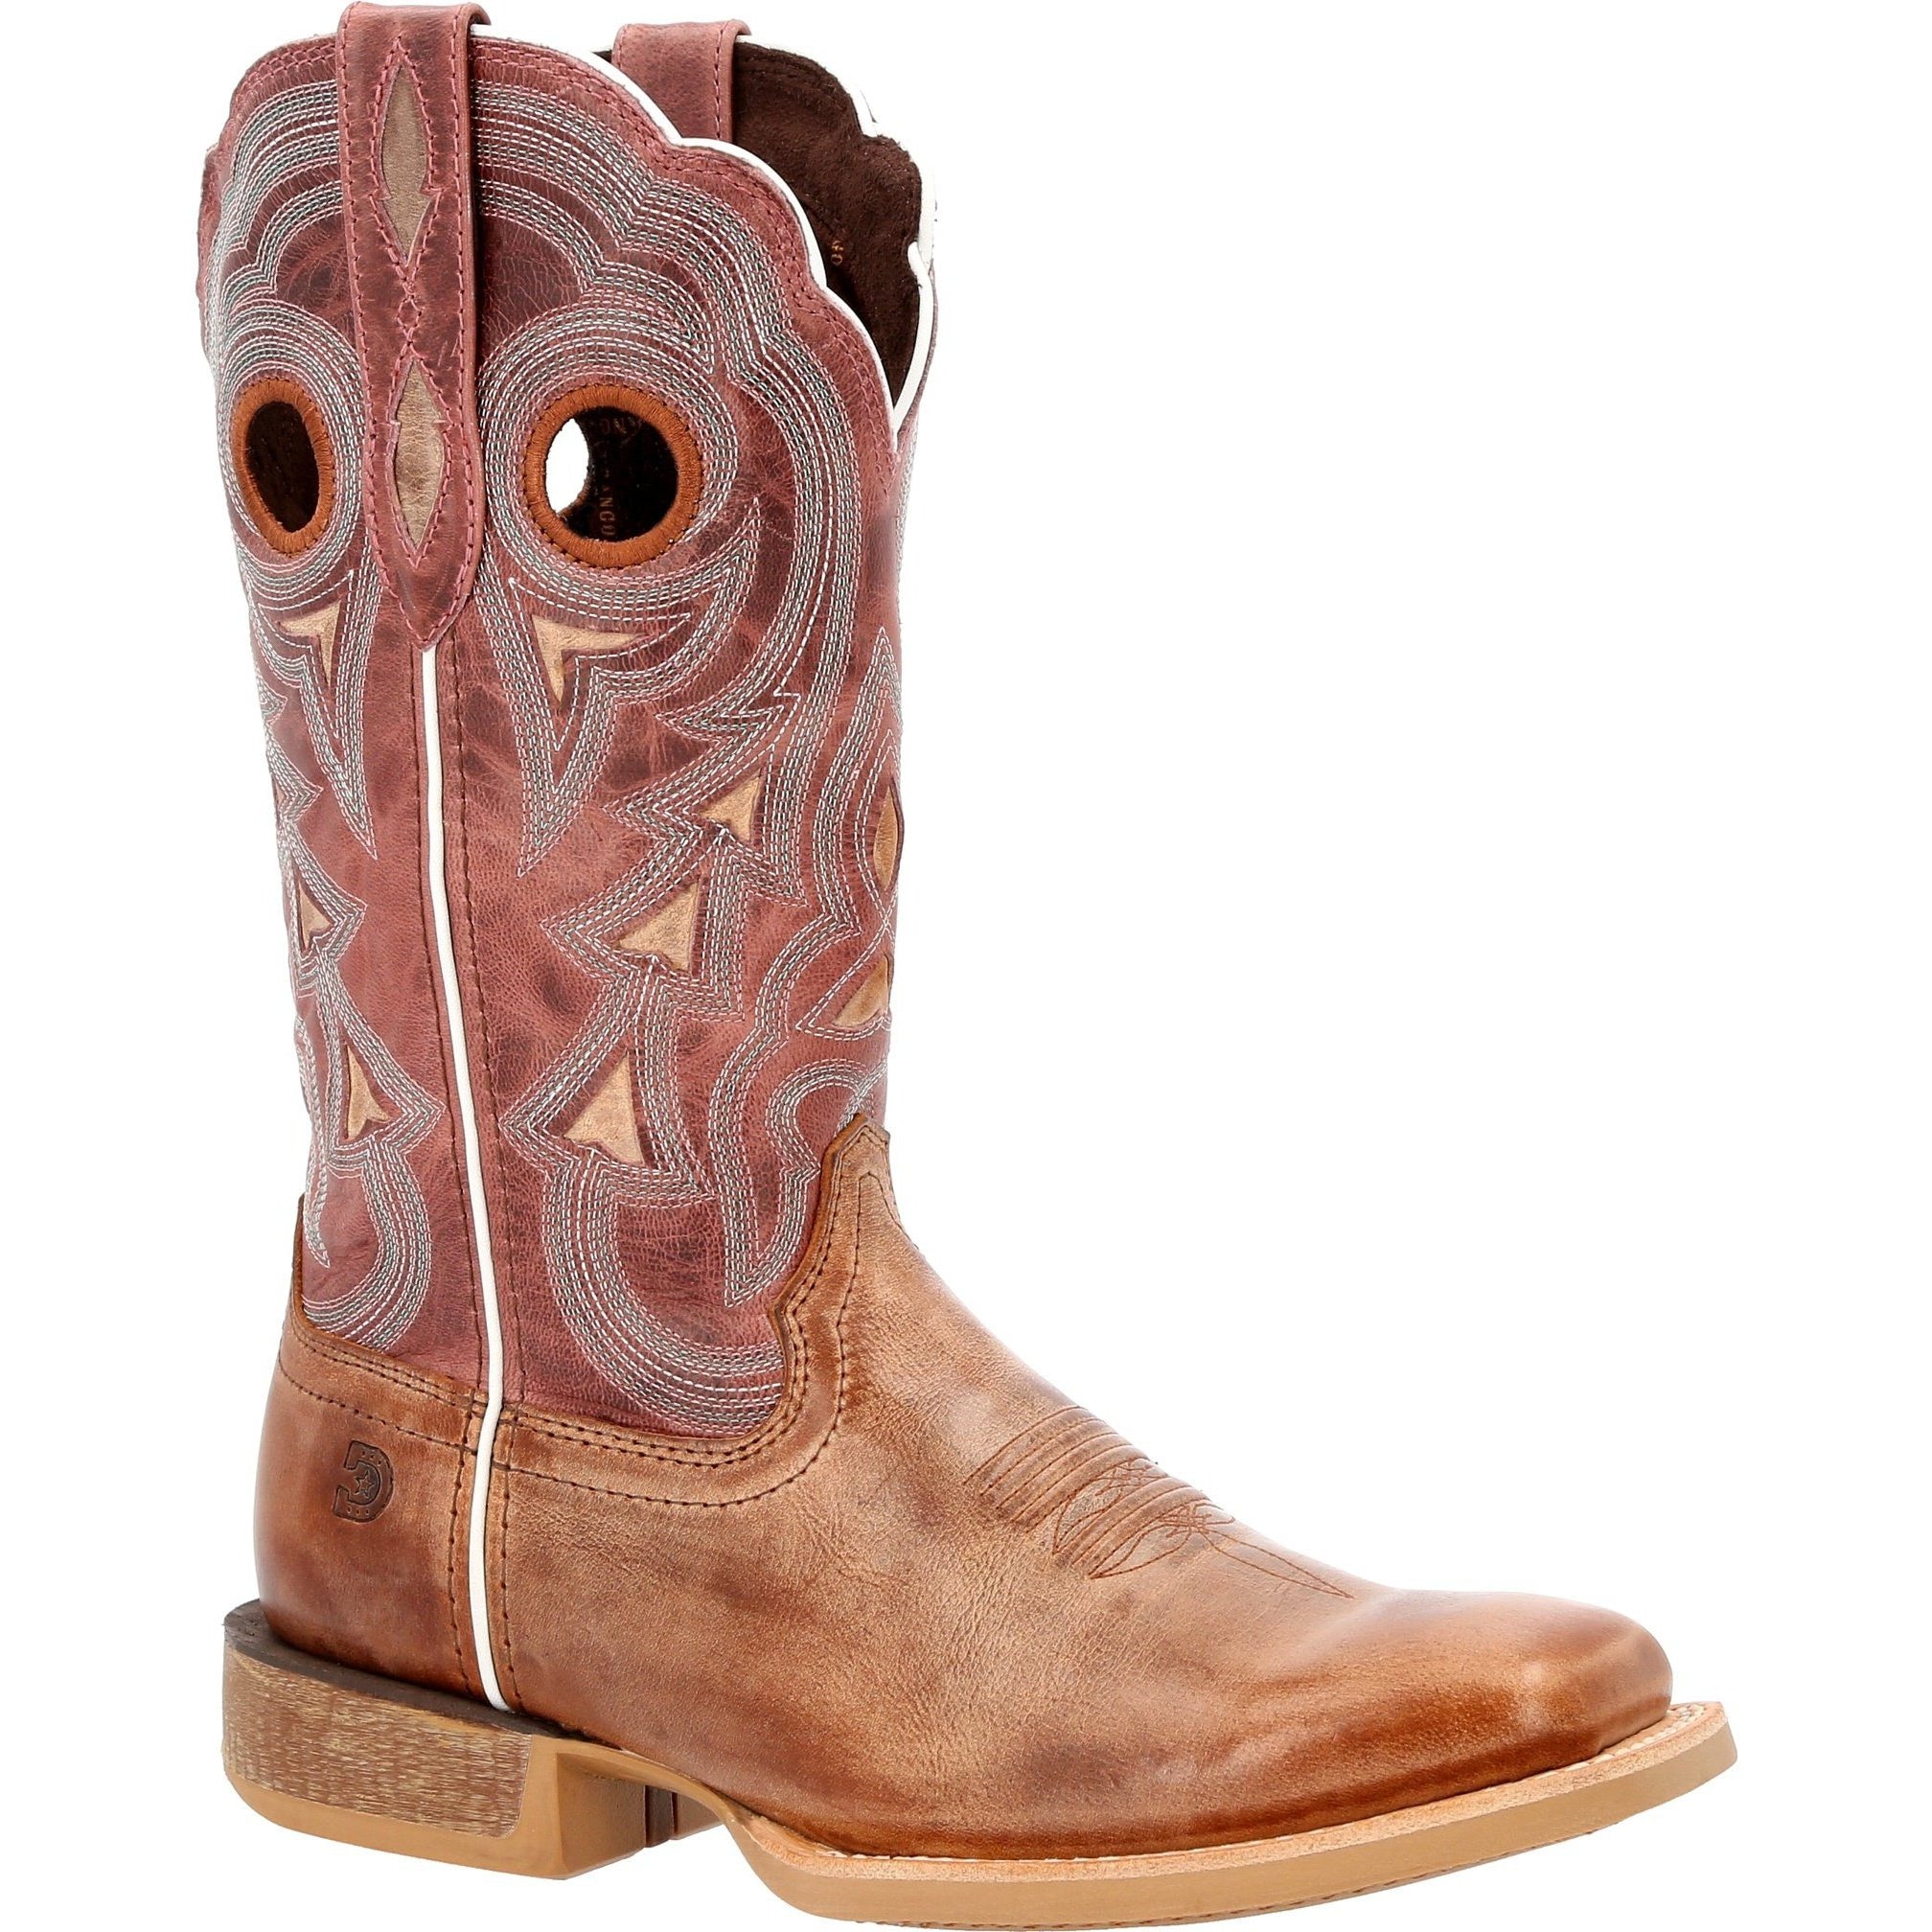 The Best Western Boots for Women | Overlook Boots – Page 2